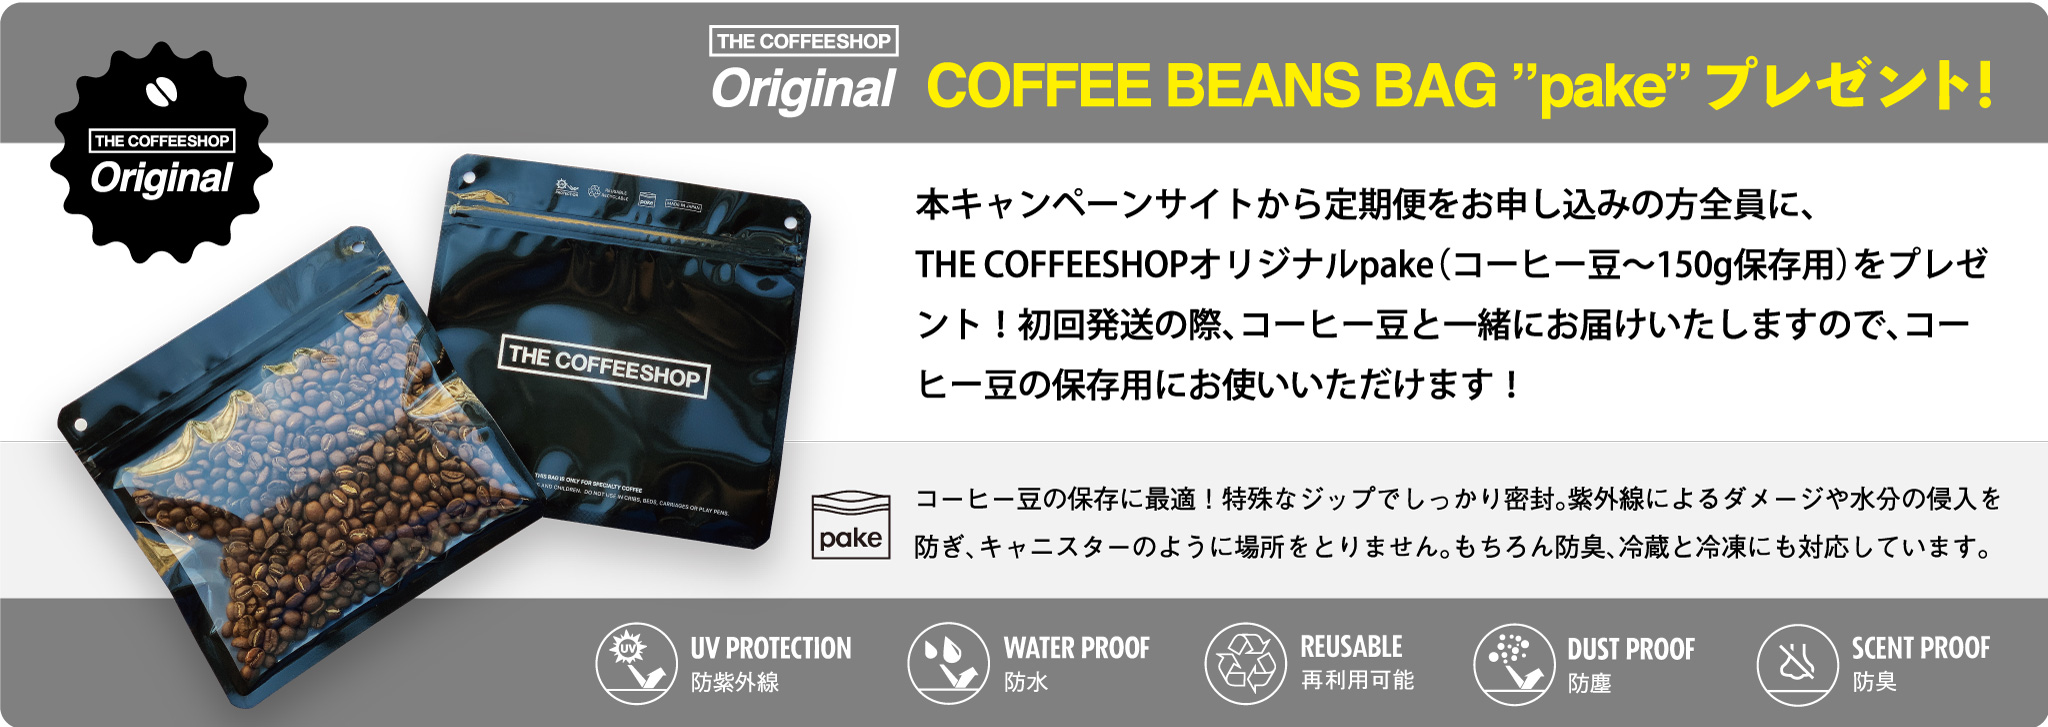 Beans Delivery Service 在宅勤務を応援！初月無料キャンペーン！